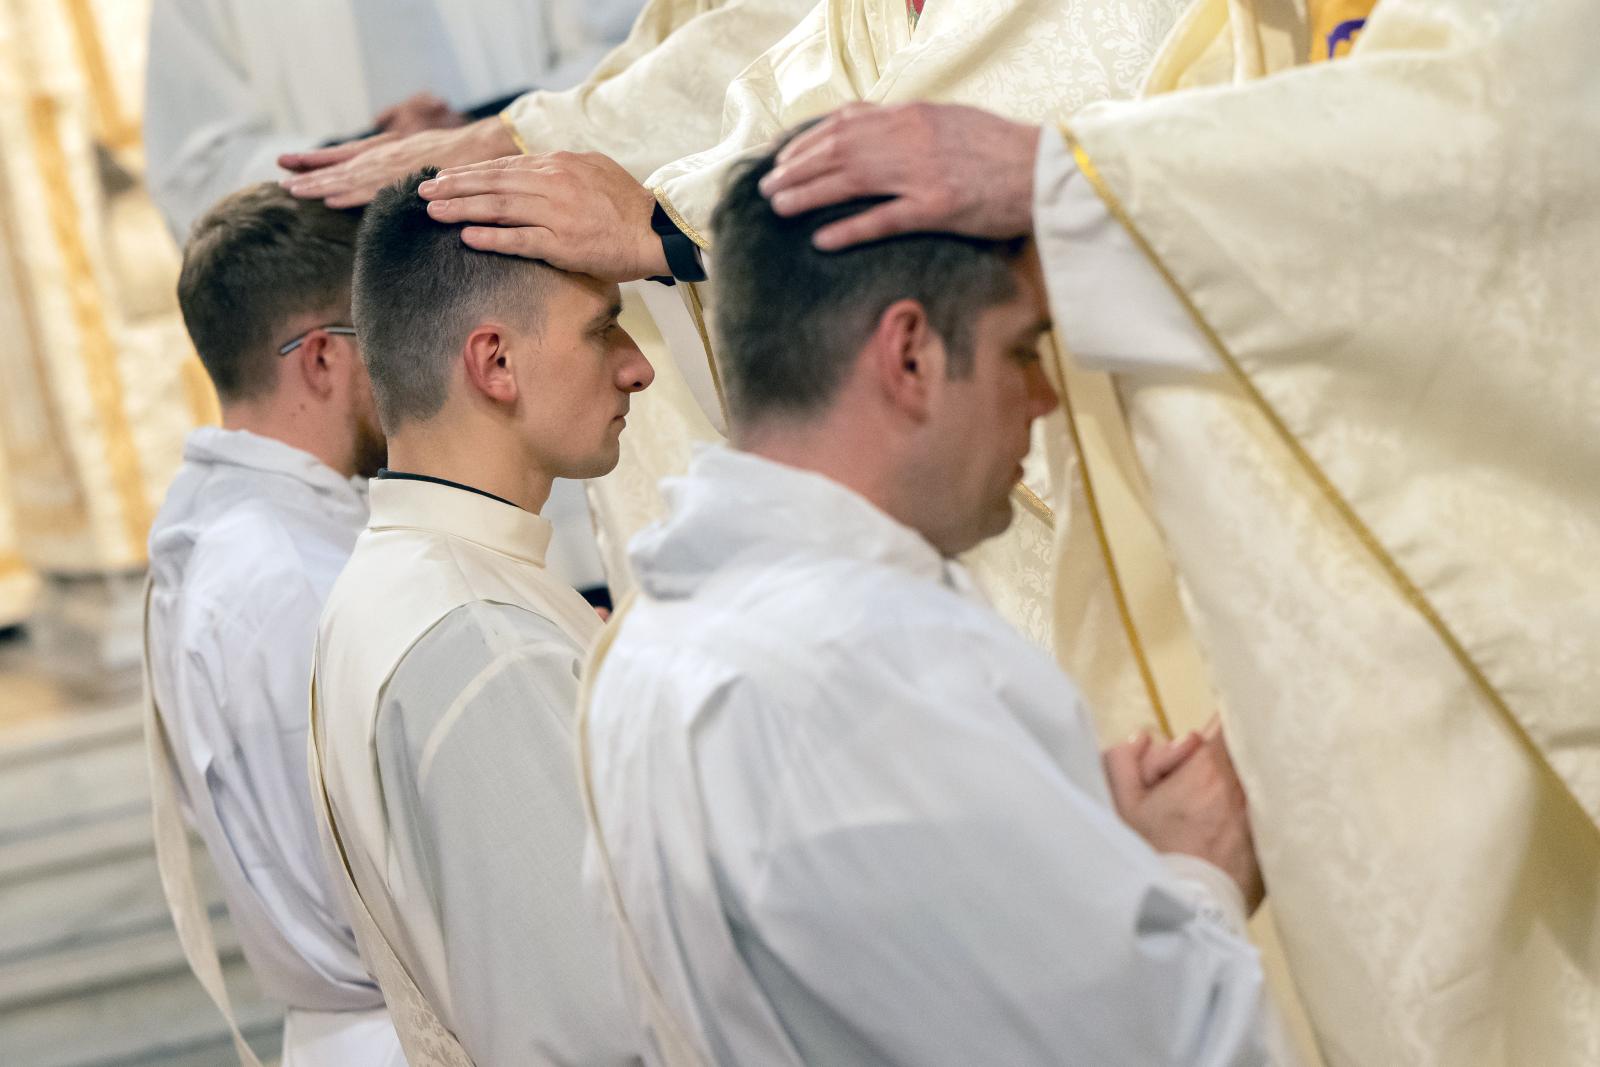 Three new priests for the Diocese of Westminster